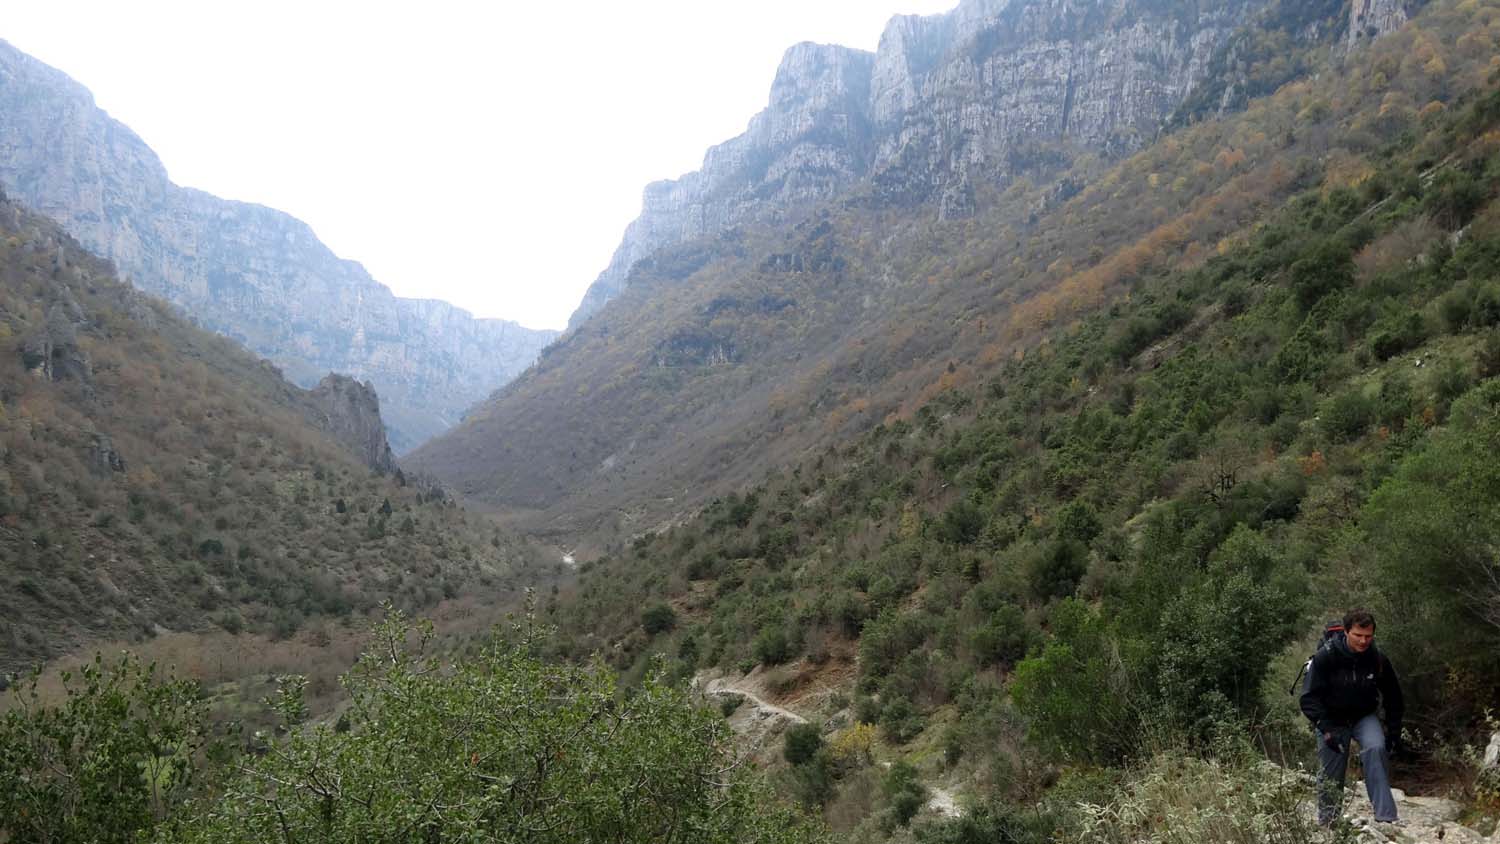 stunning Vikos gorge, unfortunately we didn't see any bears